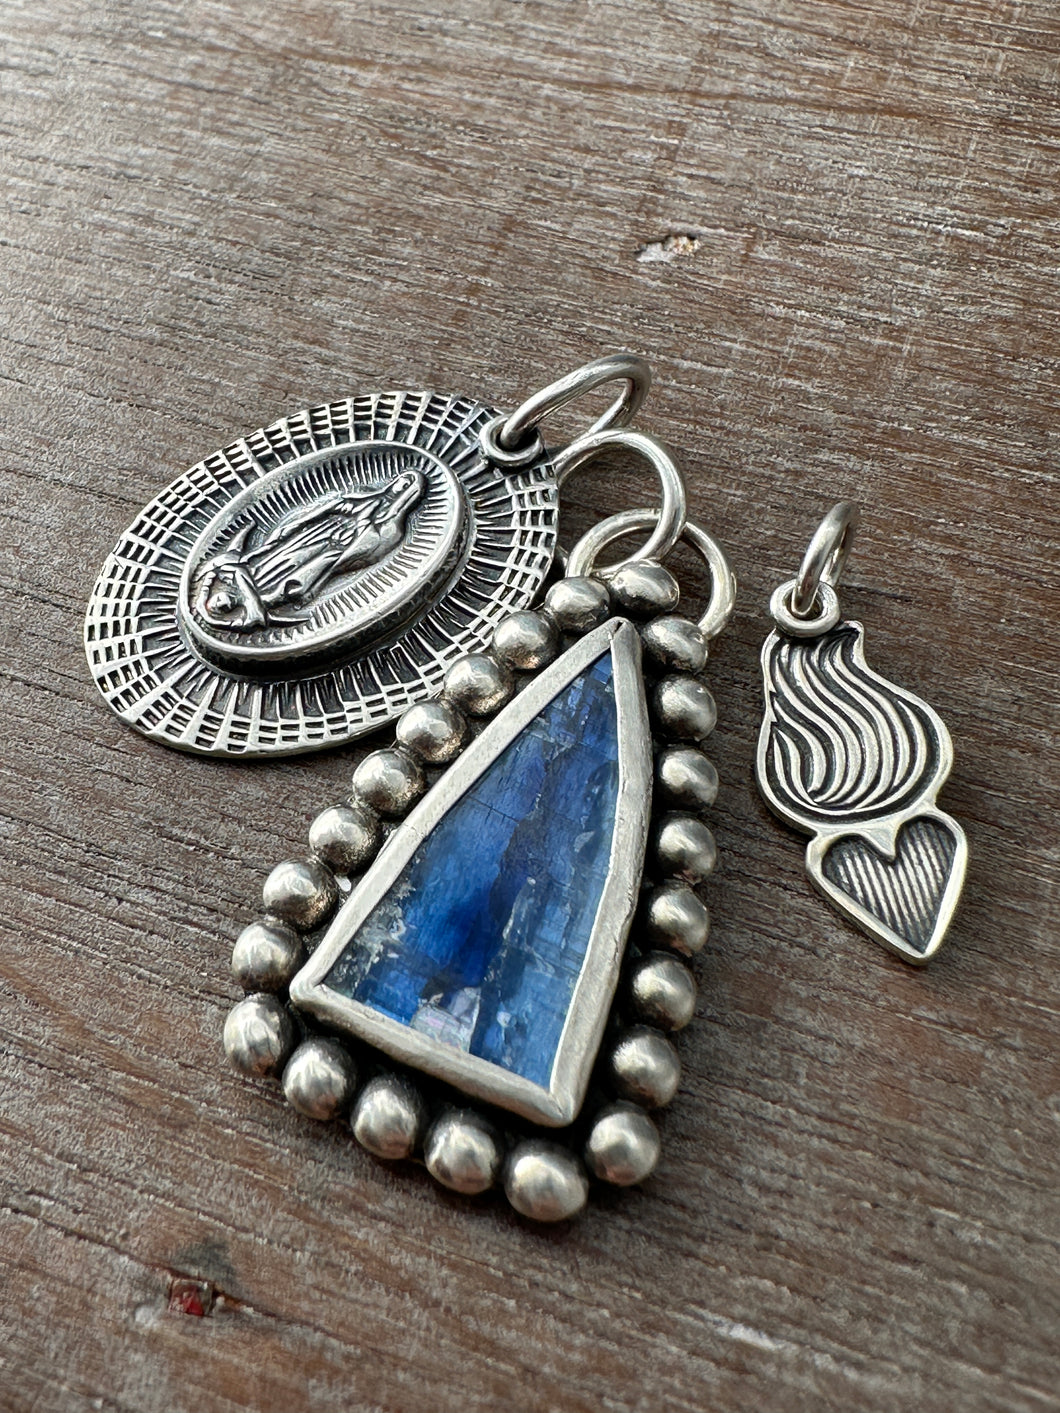 Our Lady of Guadalupe charm set with kyanite window